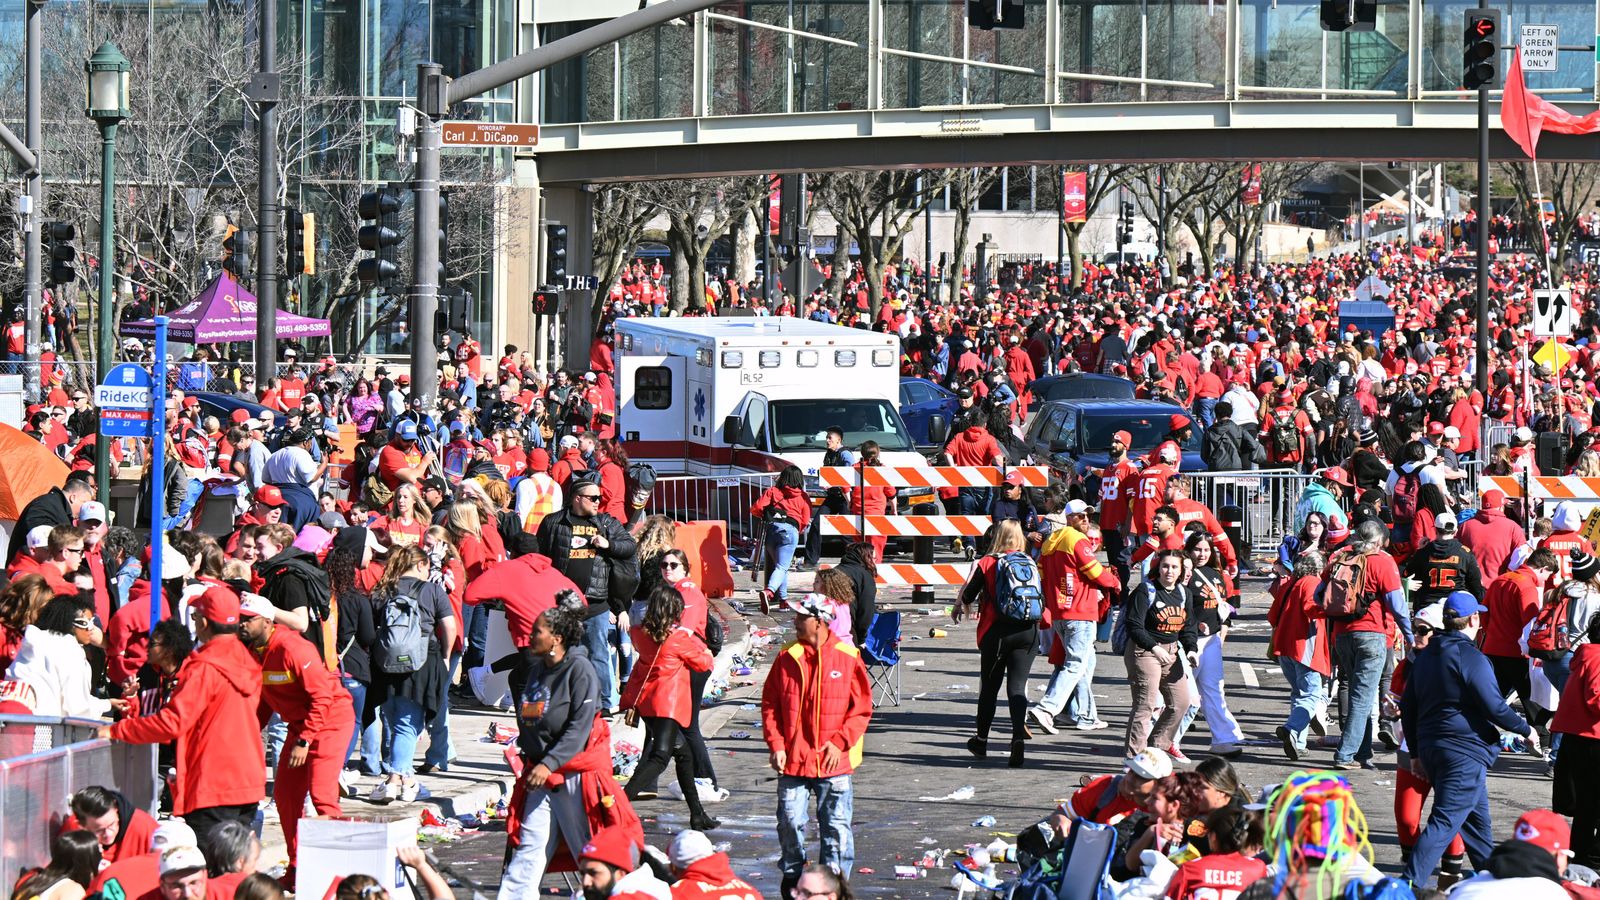 Two youths charged in connection with Kansas City Chiefs Super Bowl parade shooting